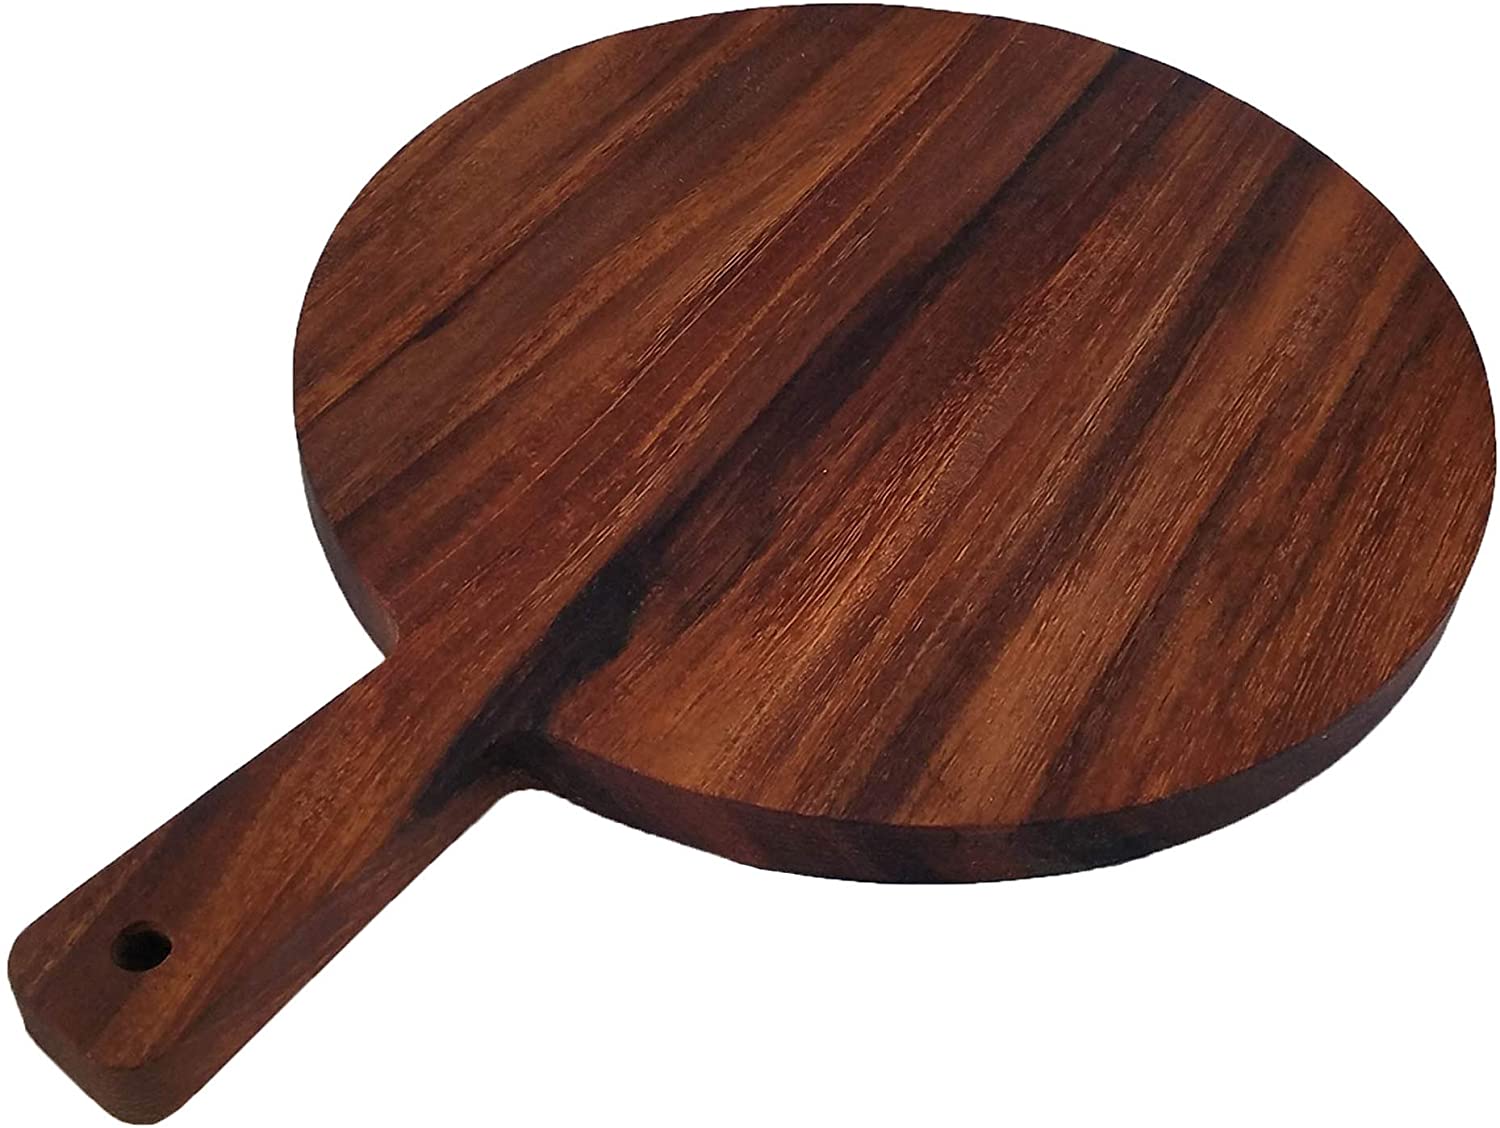 PRODUCTOS DE MADERA DE PAROTA / Round Parota Wood Serving/Cutting Board with Handle / Surprise your guests with this beautiful and useful serving and cutting board made from long-lasting Parota wood.